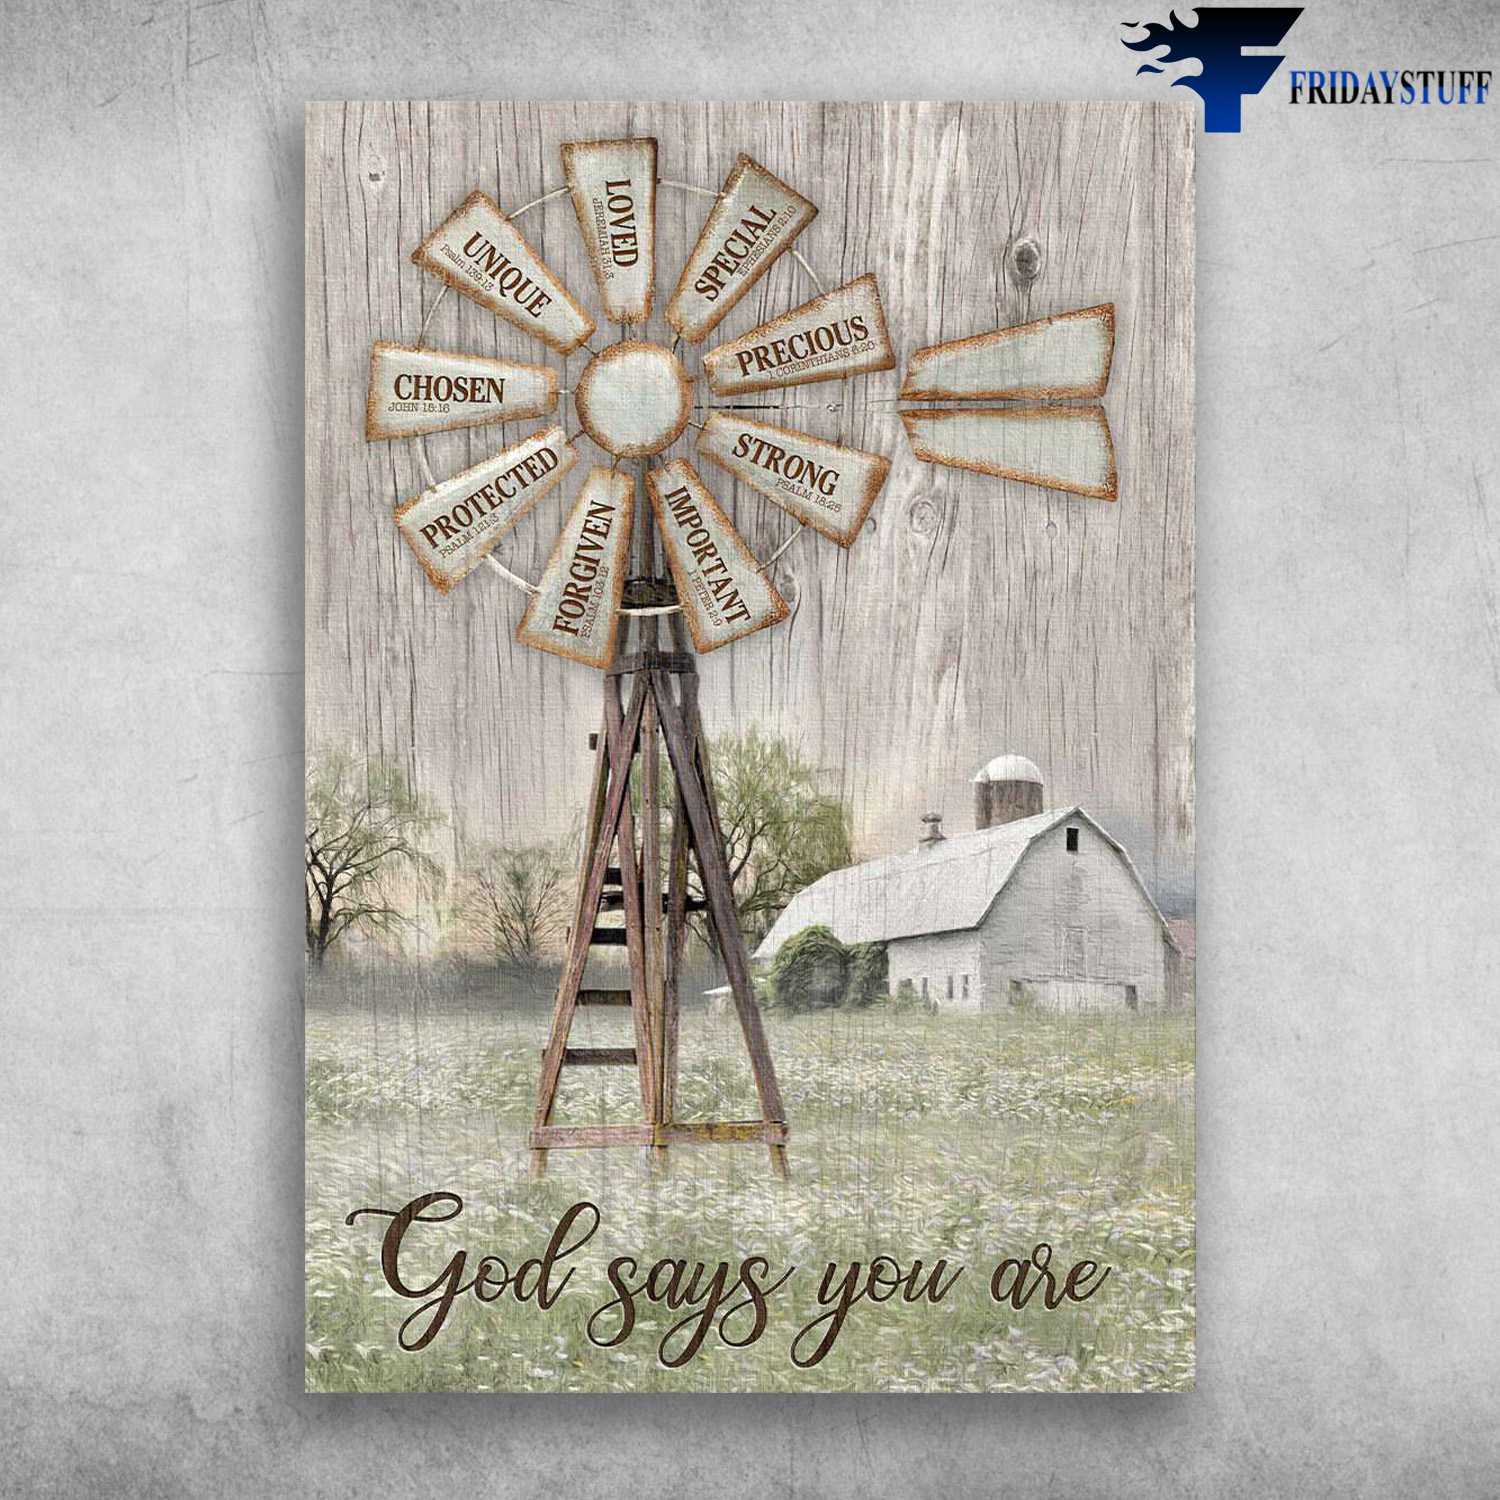 Farmhouse Scene - God Says You Are, Special, Loved, Unique, Protected, Forgiven, Important, Strong, Precious